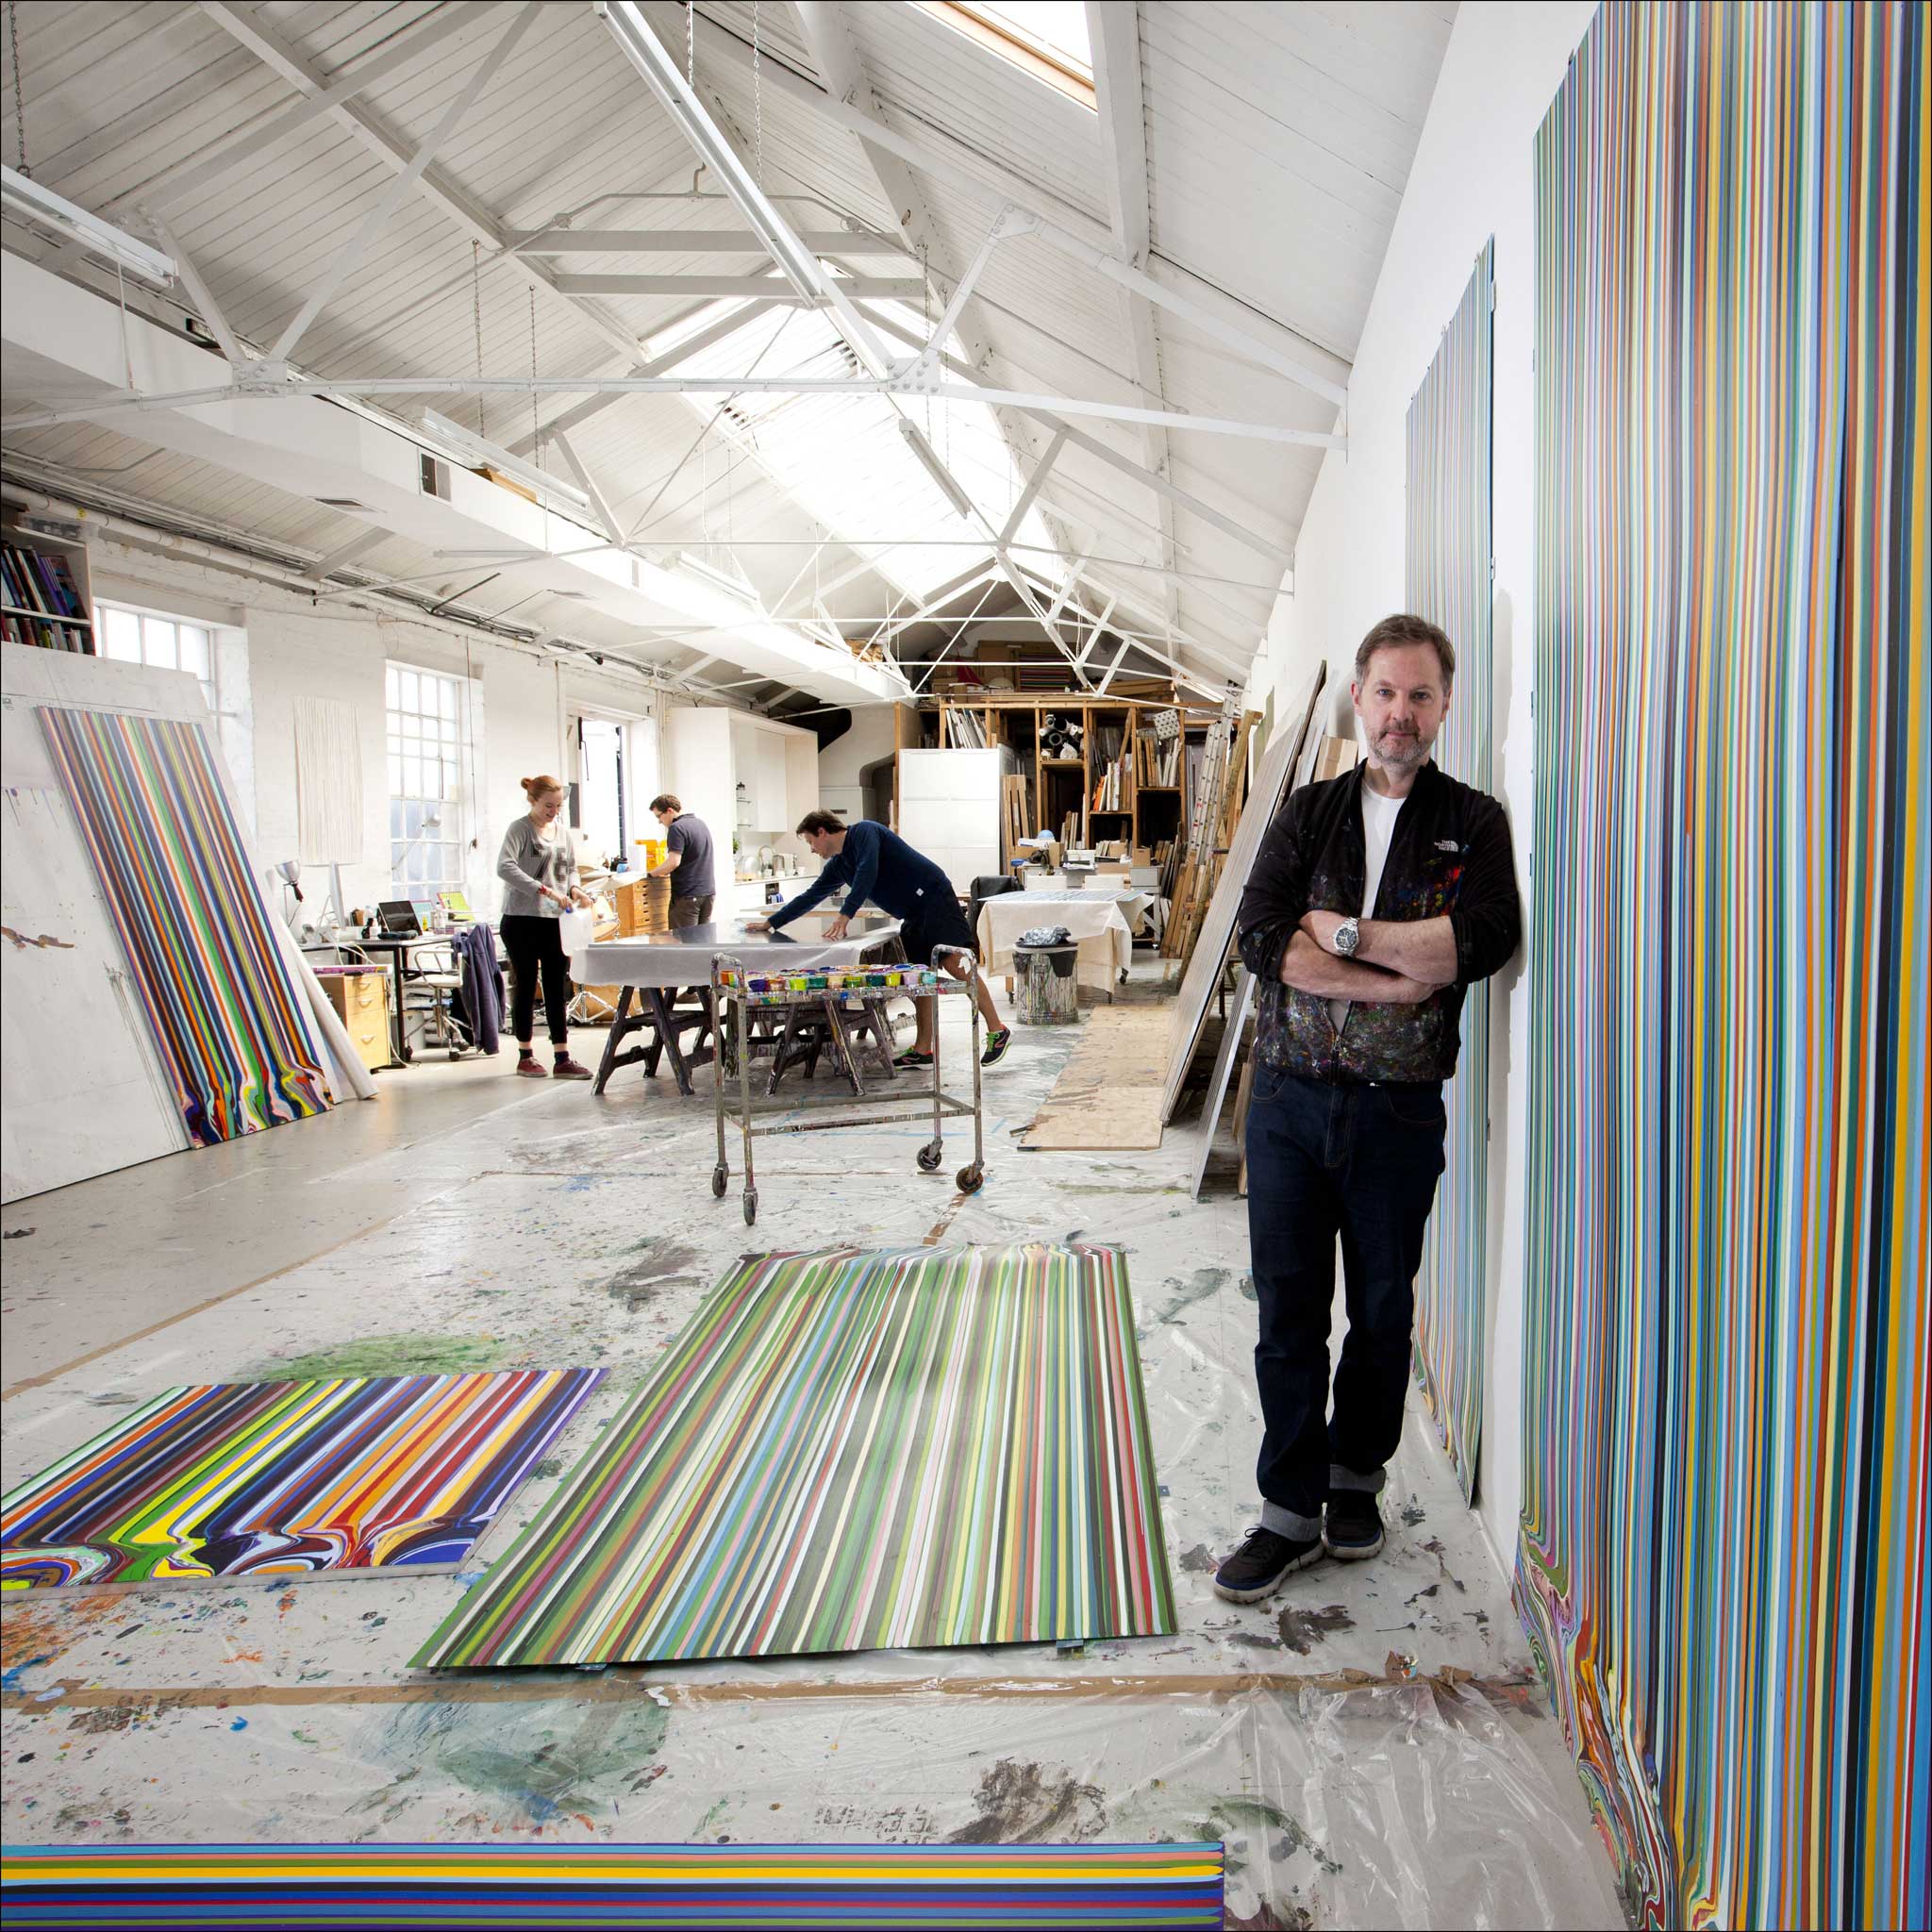 Earning his stripes: Ian Davenport at work in Peckham